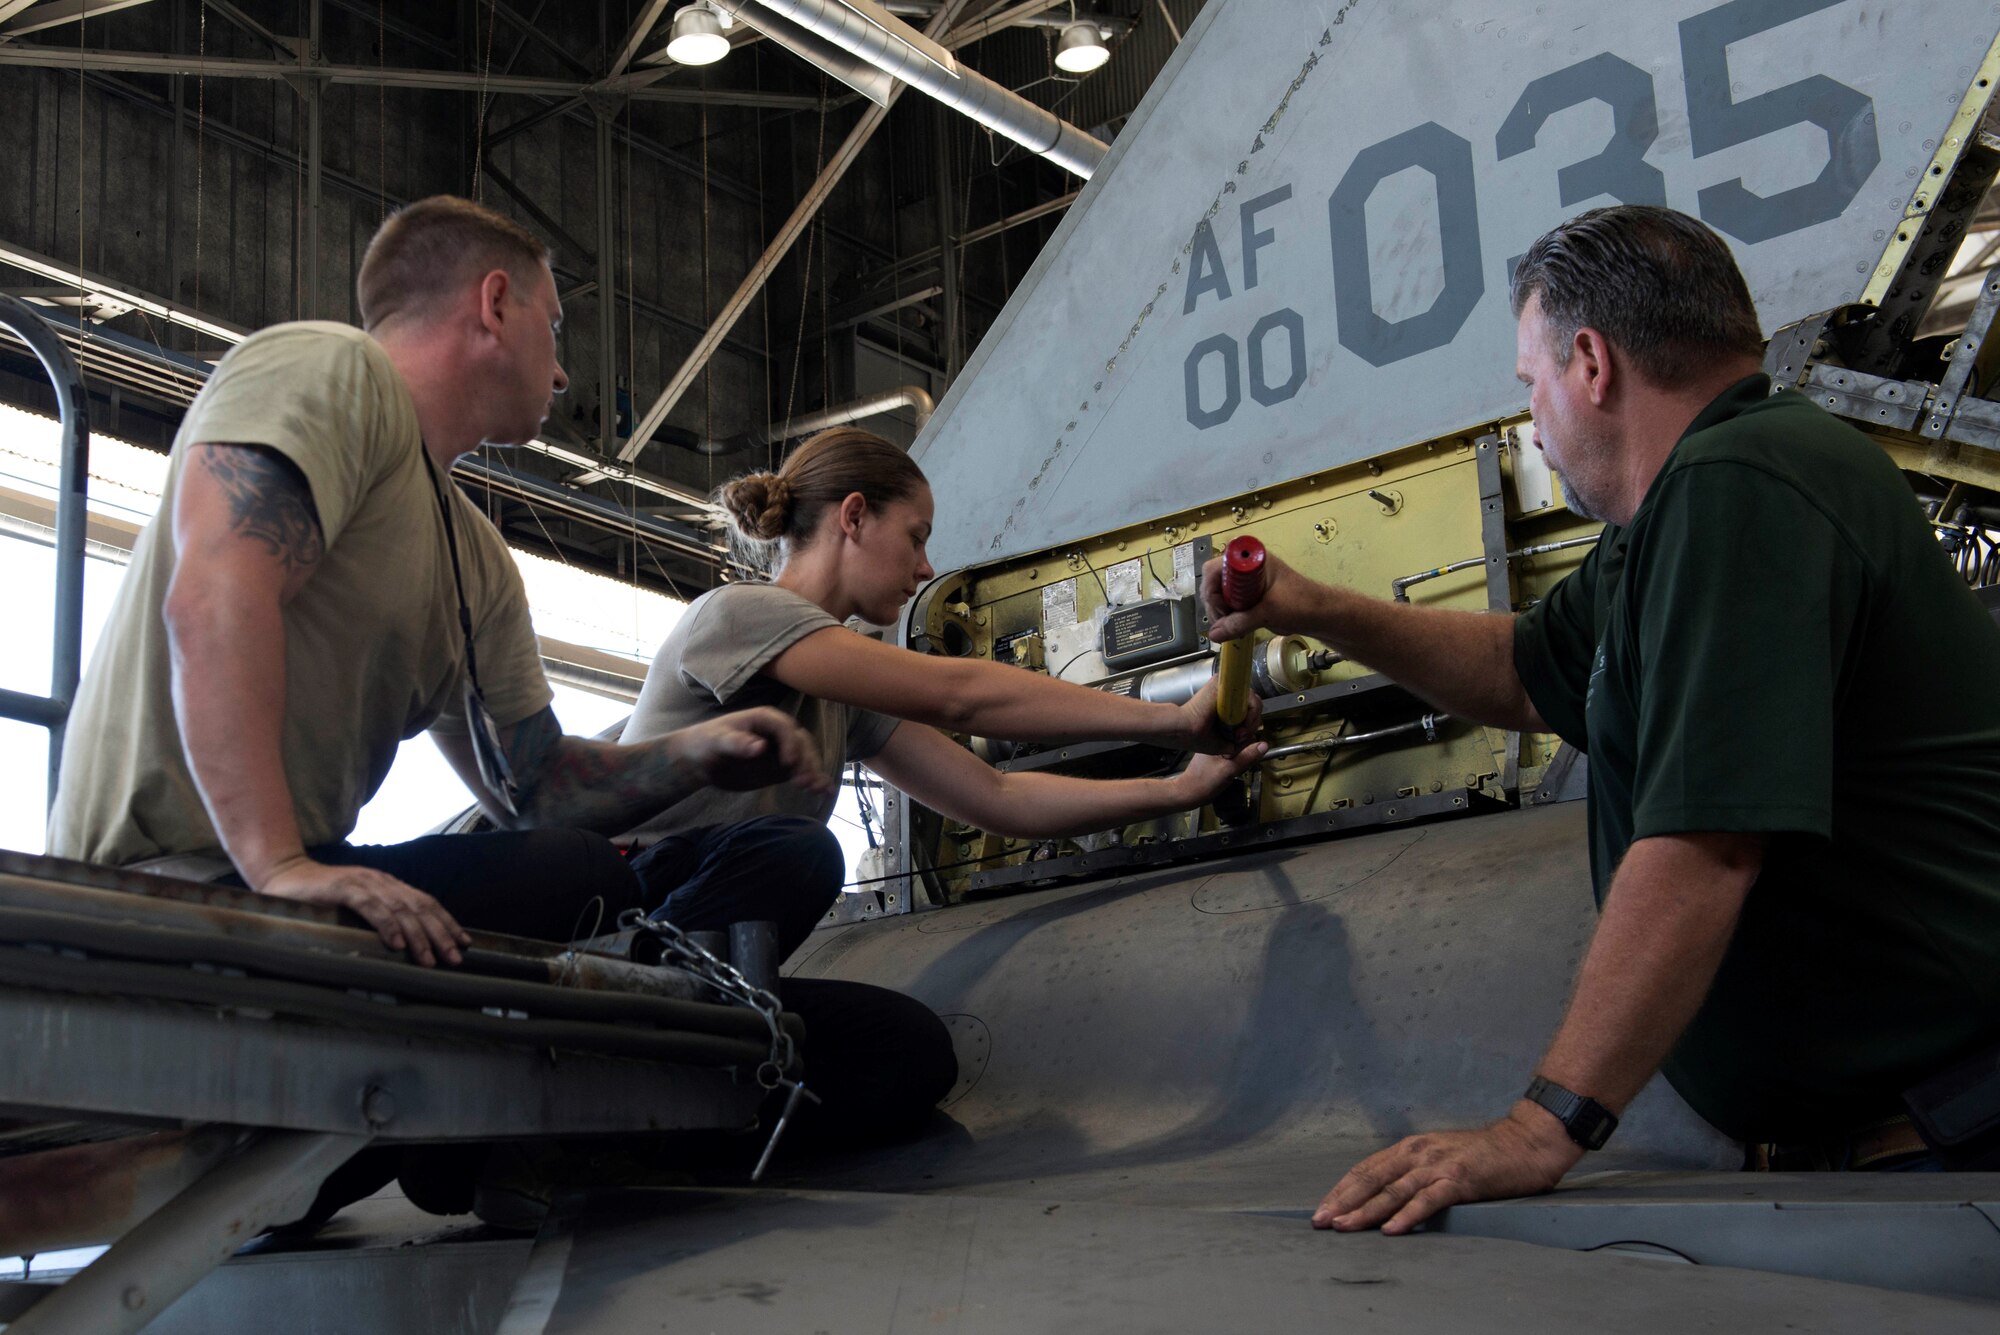 U.S. Air Force Staff Sgt. Ronald Scala, 20th Aircraft Maintenance Squadron (AMXS) tactical aircraft maintainer, left, and Airman 1st Class Krystin Bartelt, 20th AMXS assistant tactical aircraft maintainer, turn a bolt at Shaw Air Force Base, S.C., Sept. 11, 2018.